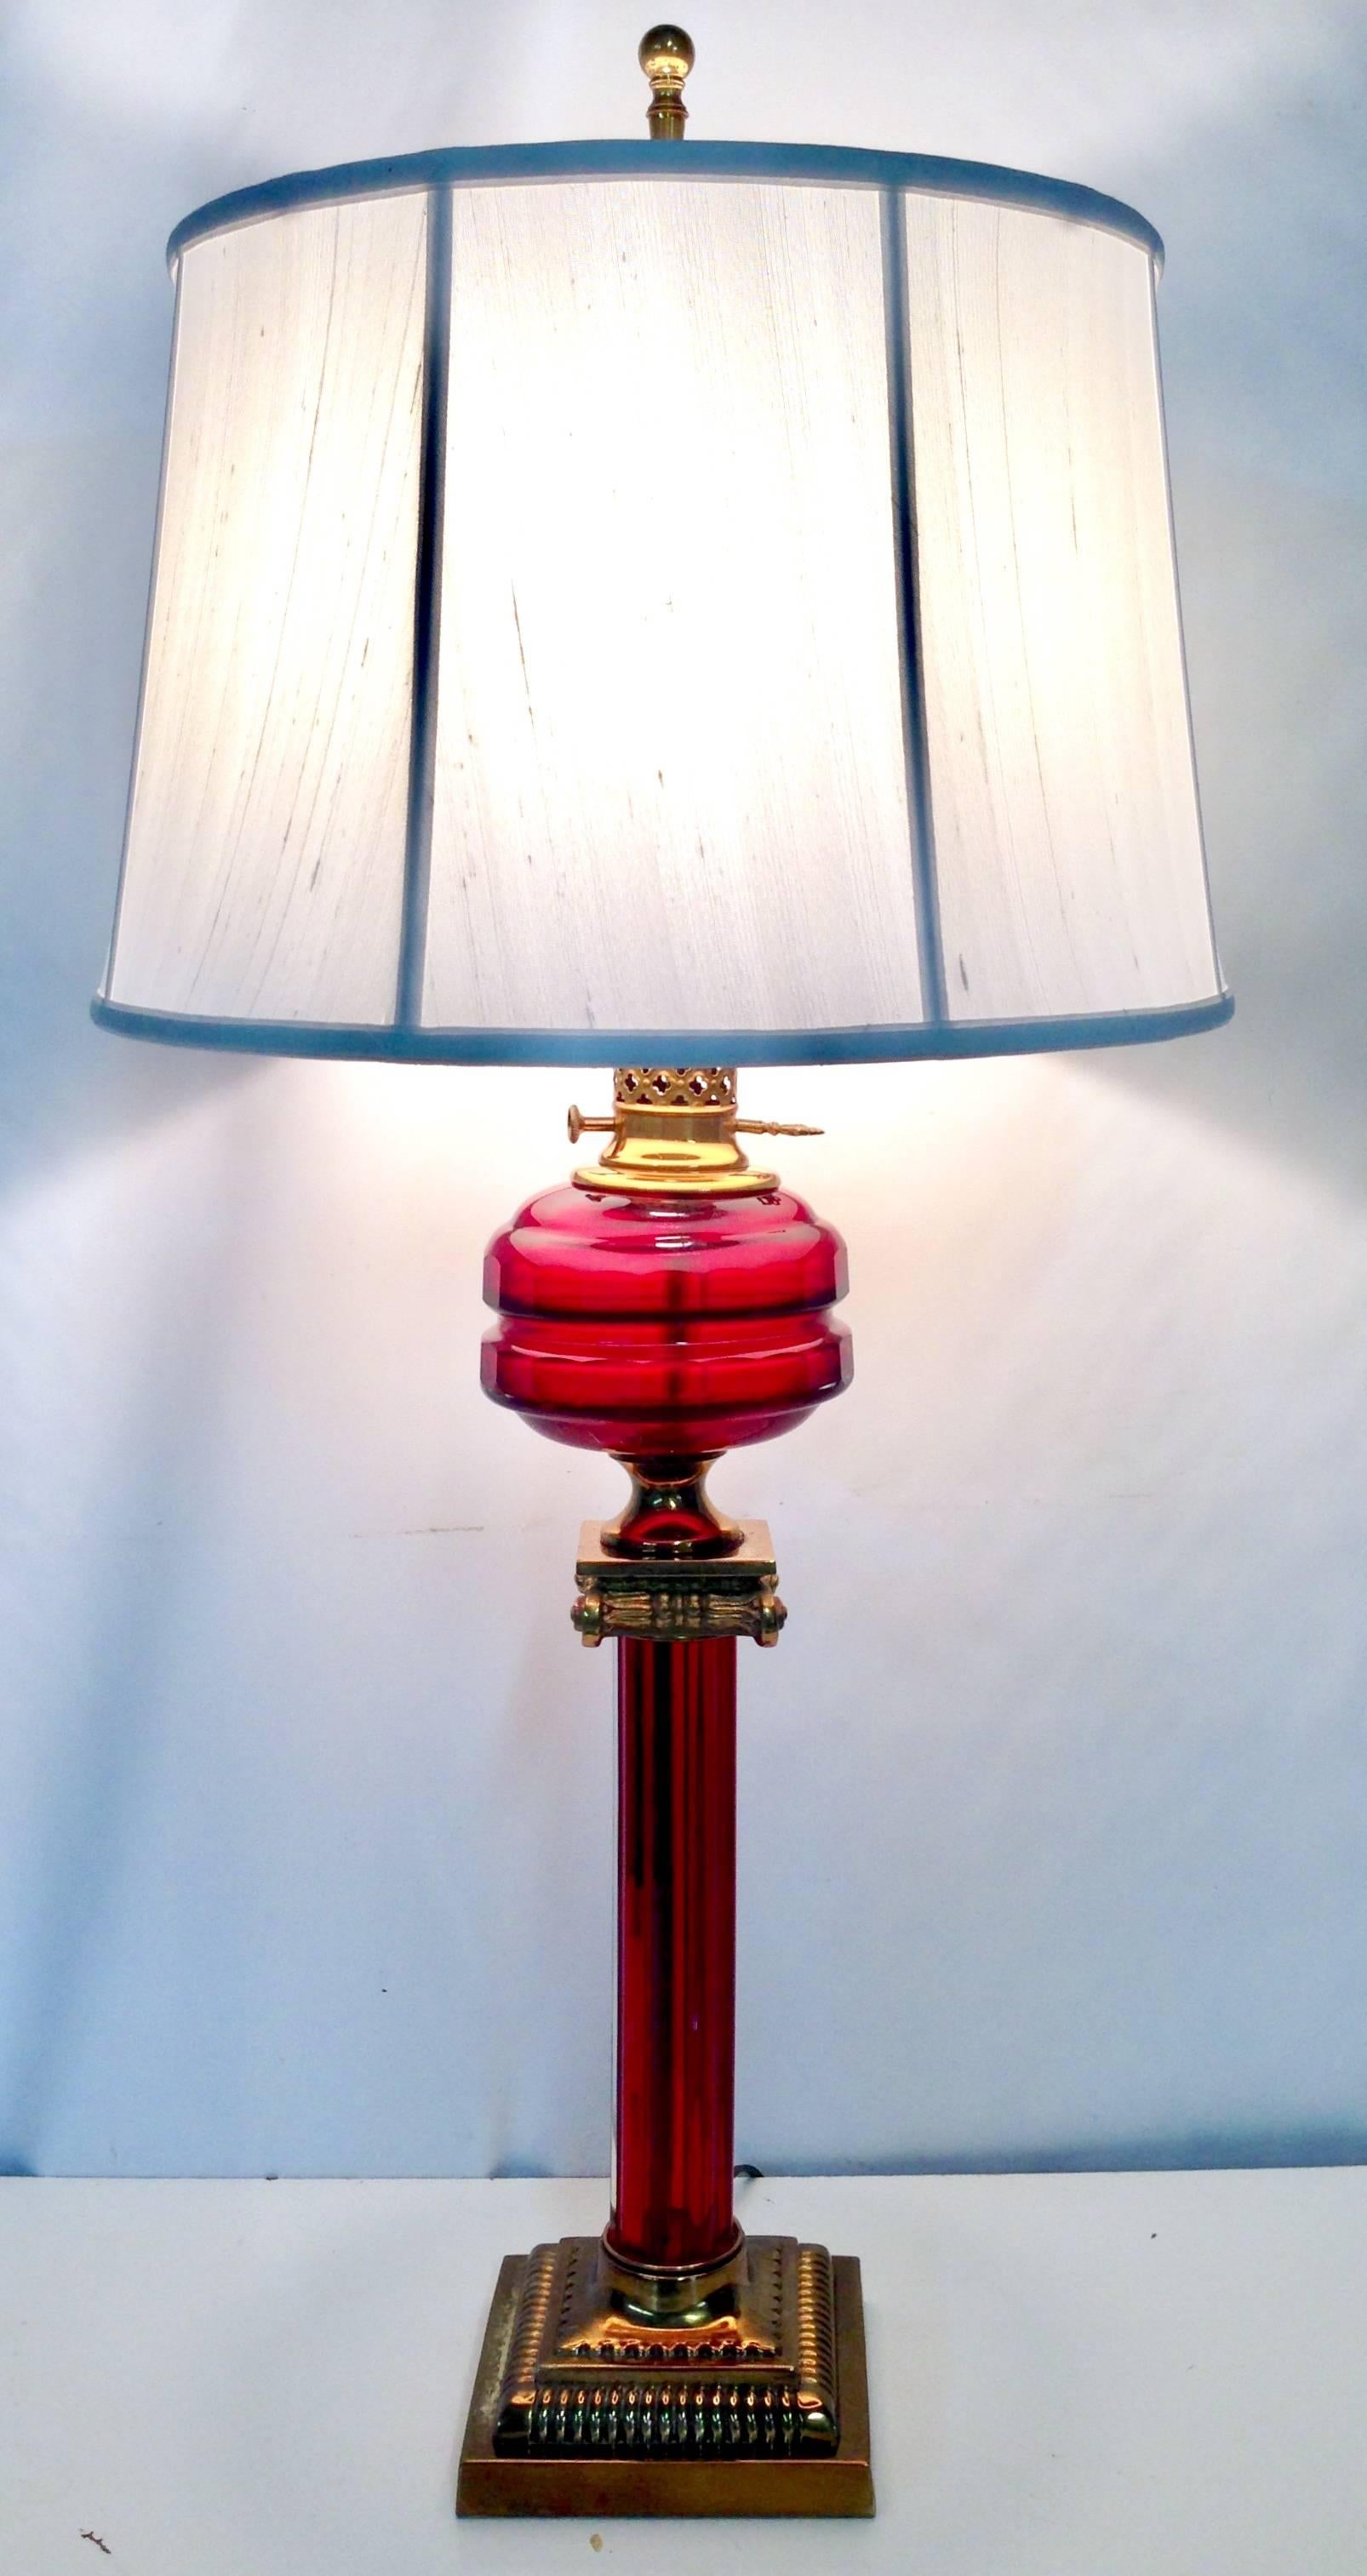 Antique Cranberry blown glass column lamp with polished solid brass accents. This fluted oil style lamp features original brass fittings. Includes a brass harp and finial. Height  to socket, 27.5